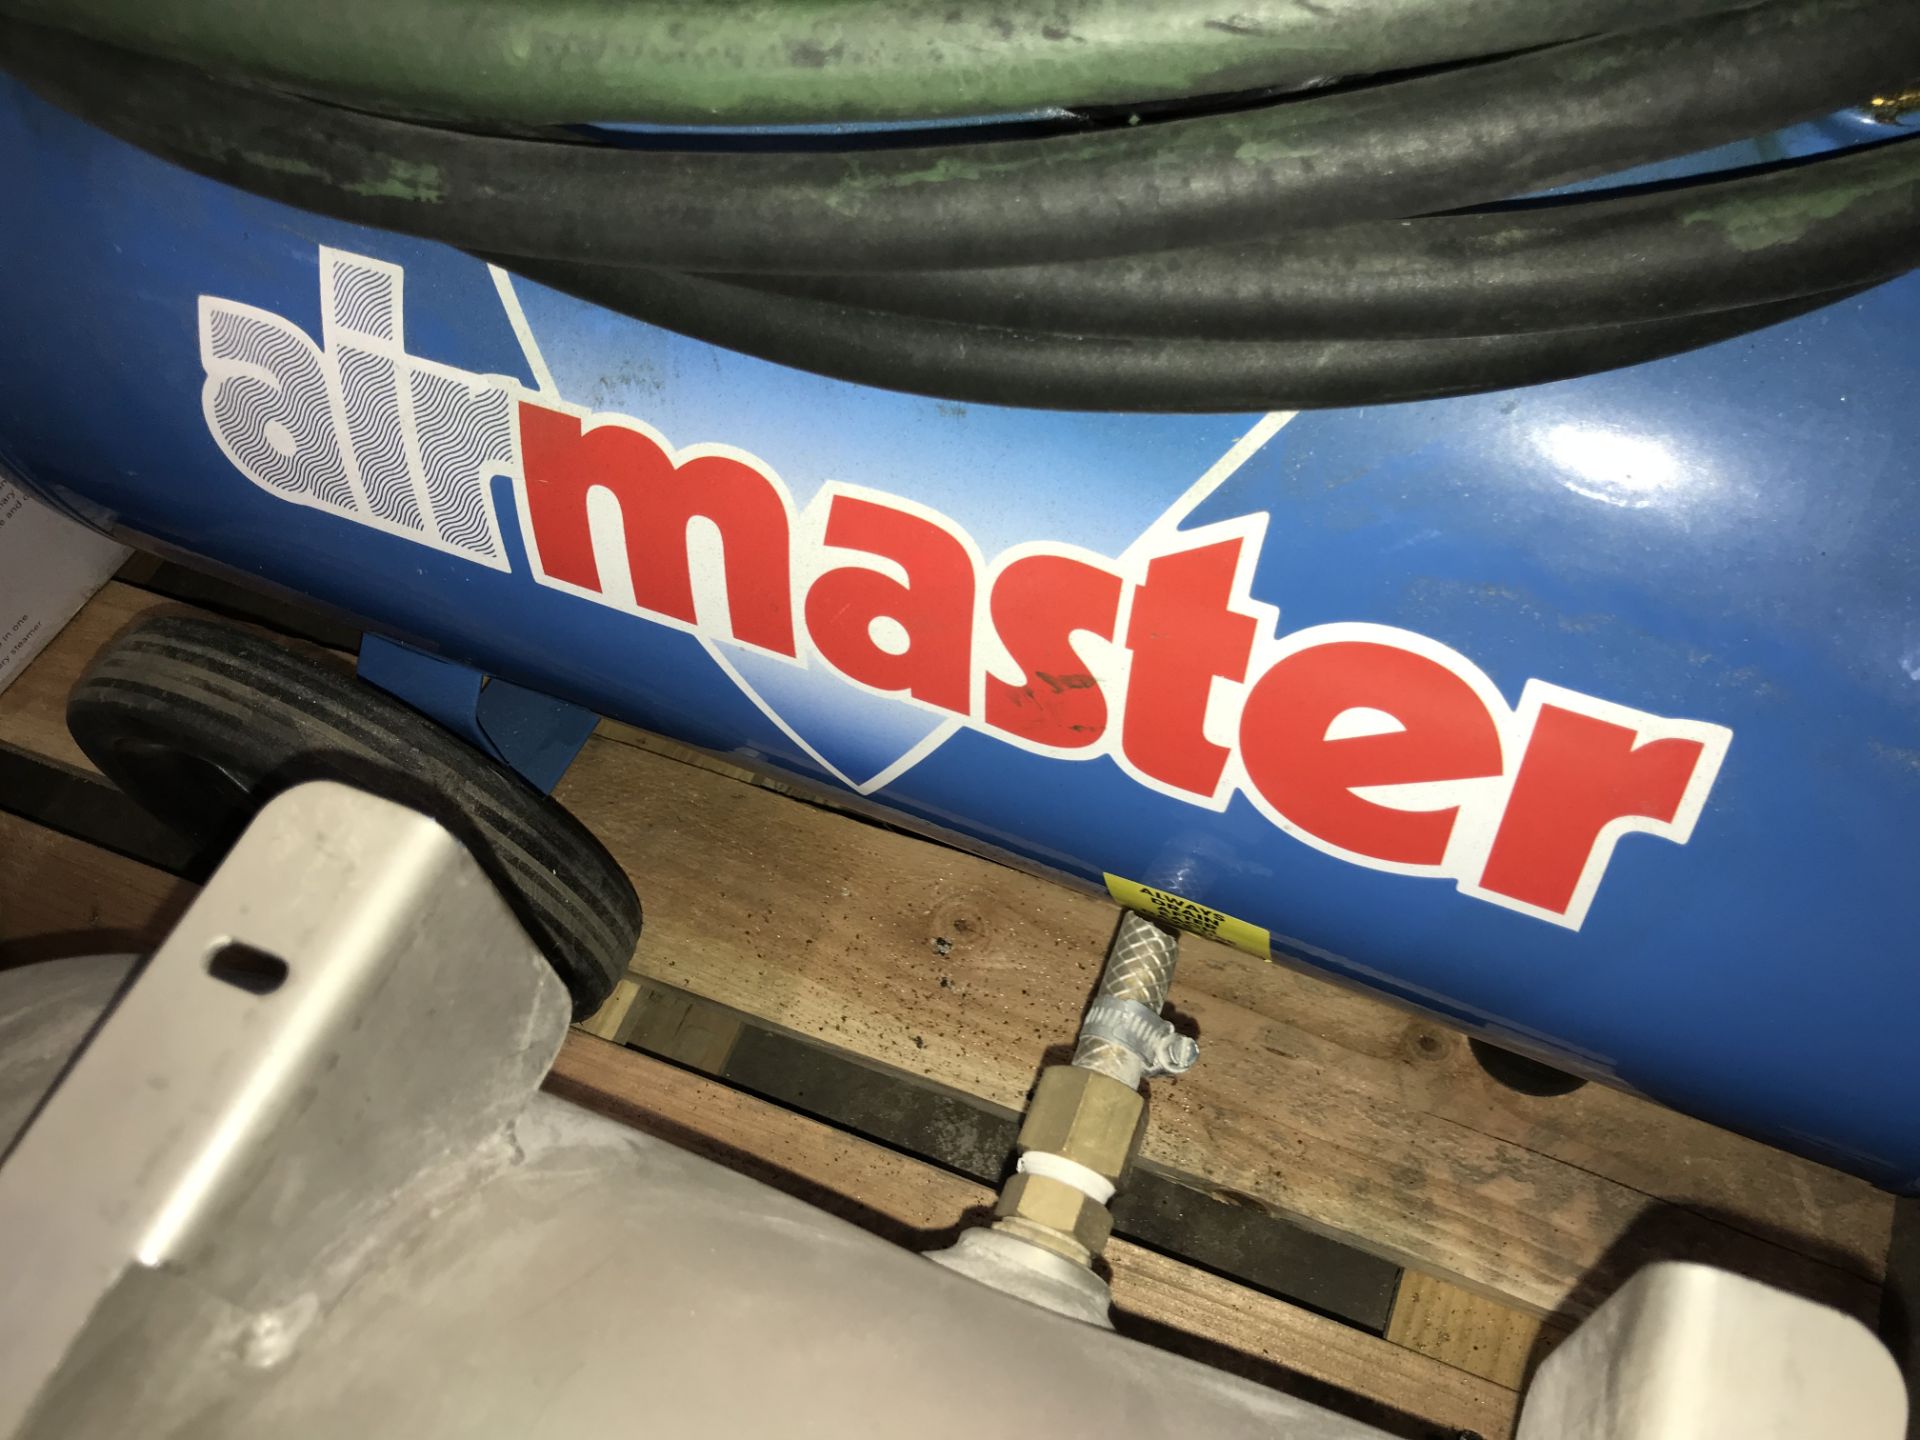 Airmaster Mobile Air Compressor w/ Tiger 8/510 Turbo Motor - Image 3 of 3